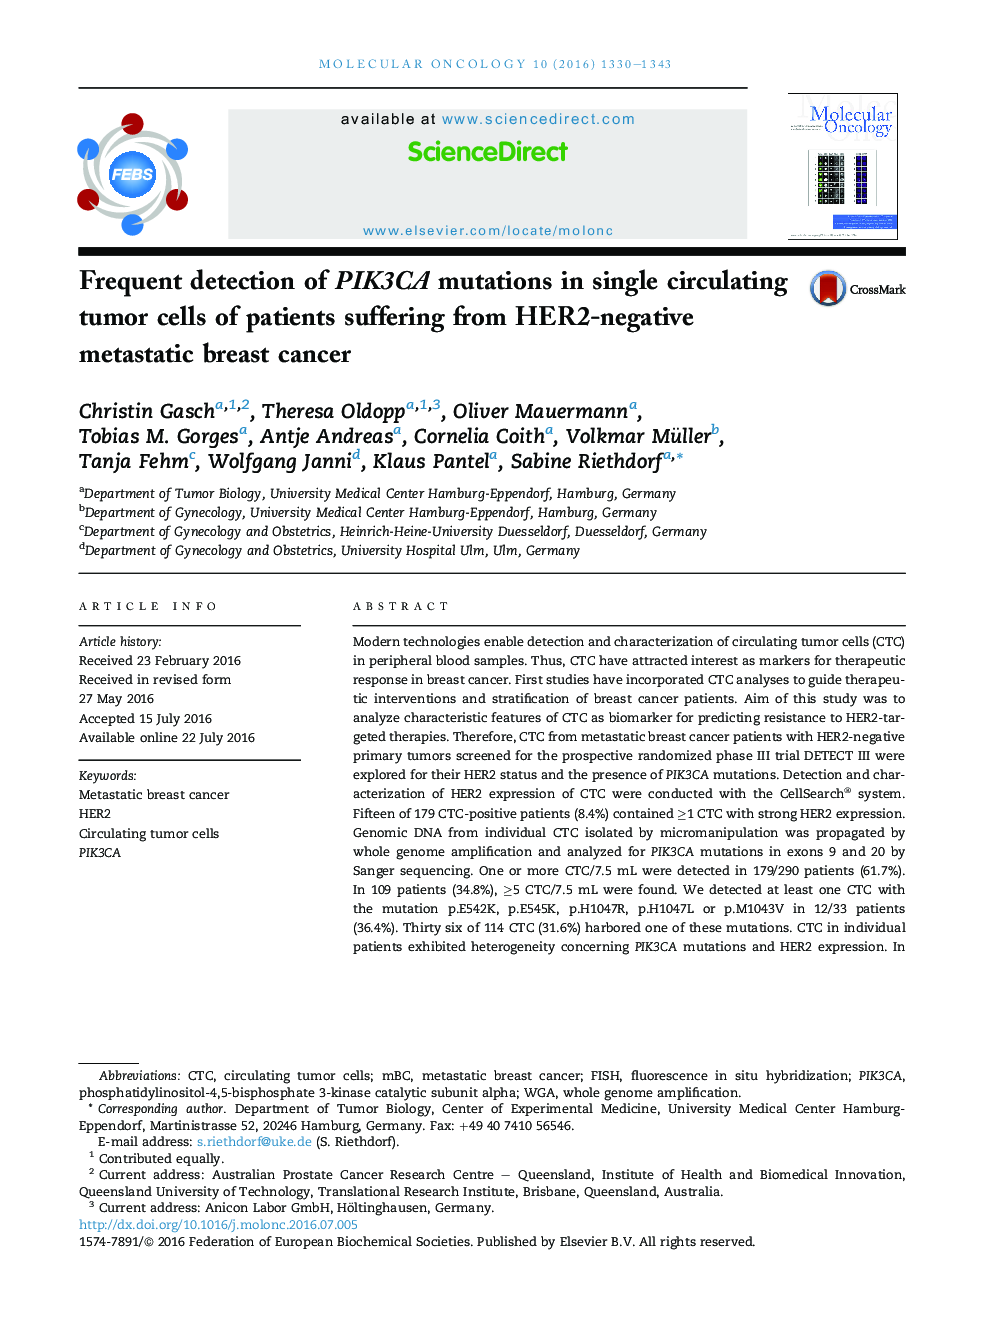 Frequent detection of PIK3CA mutations in single circulating tumor cells of patients suffering from HER2-negative metastatic breast cancer